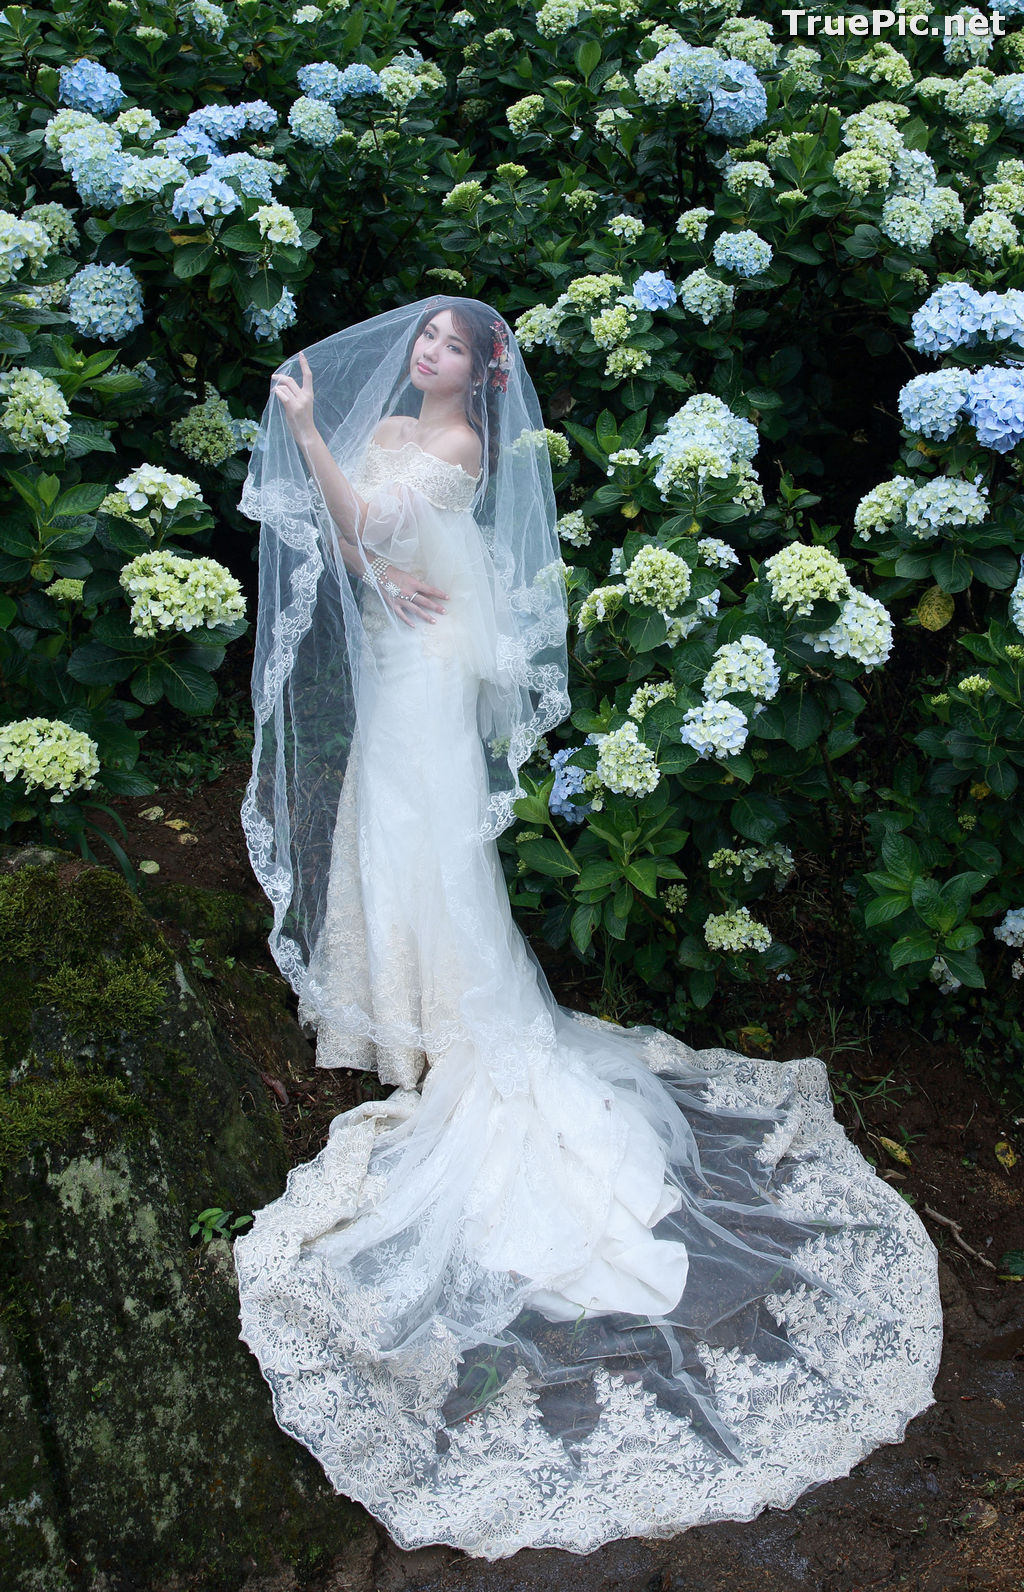 Image Taiwanese Model - 張倫甄 - Beautiful Bride and Hydrangea Flowers - TruePic.net - Picture-31